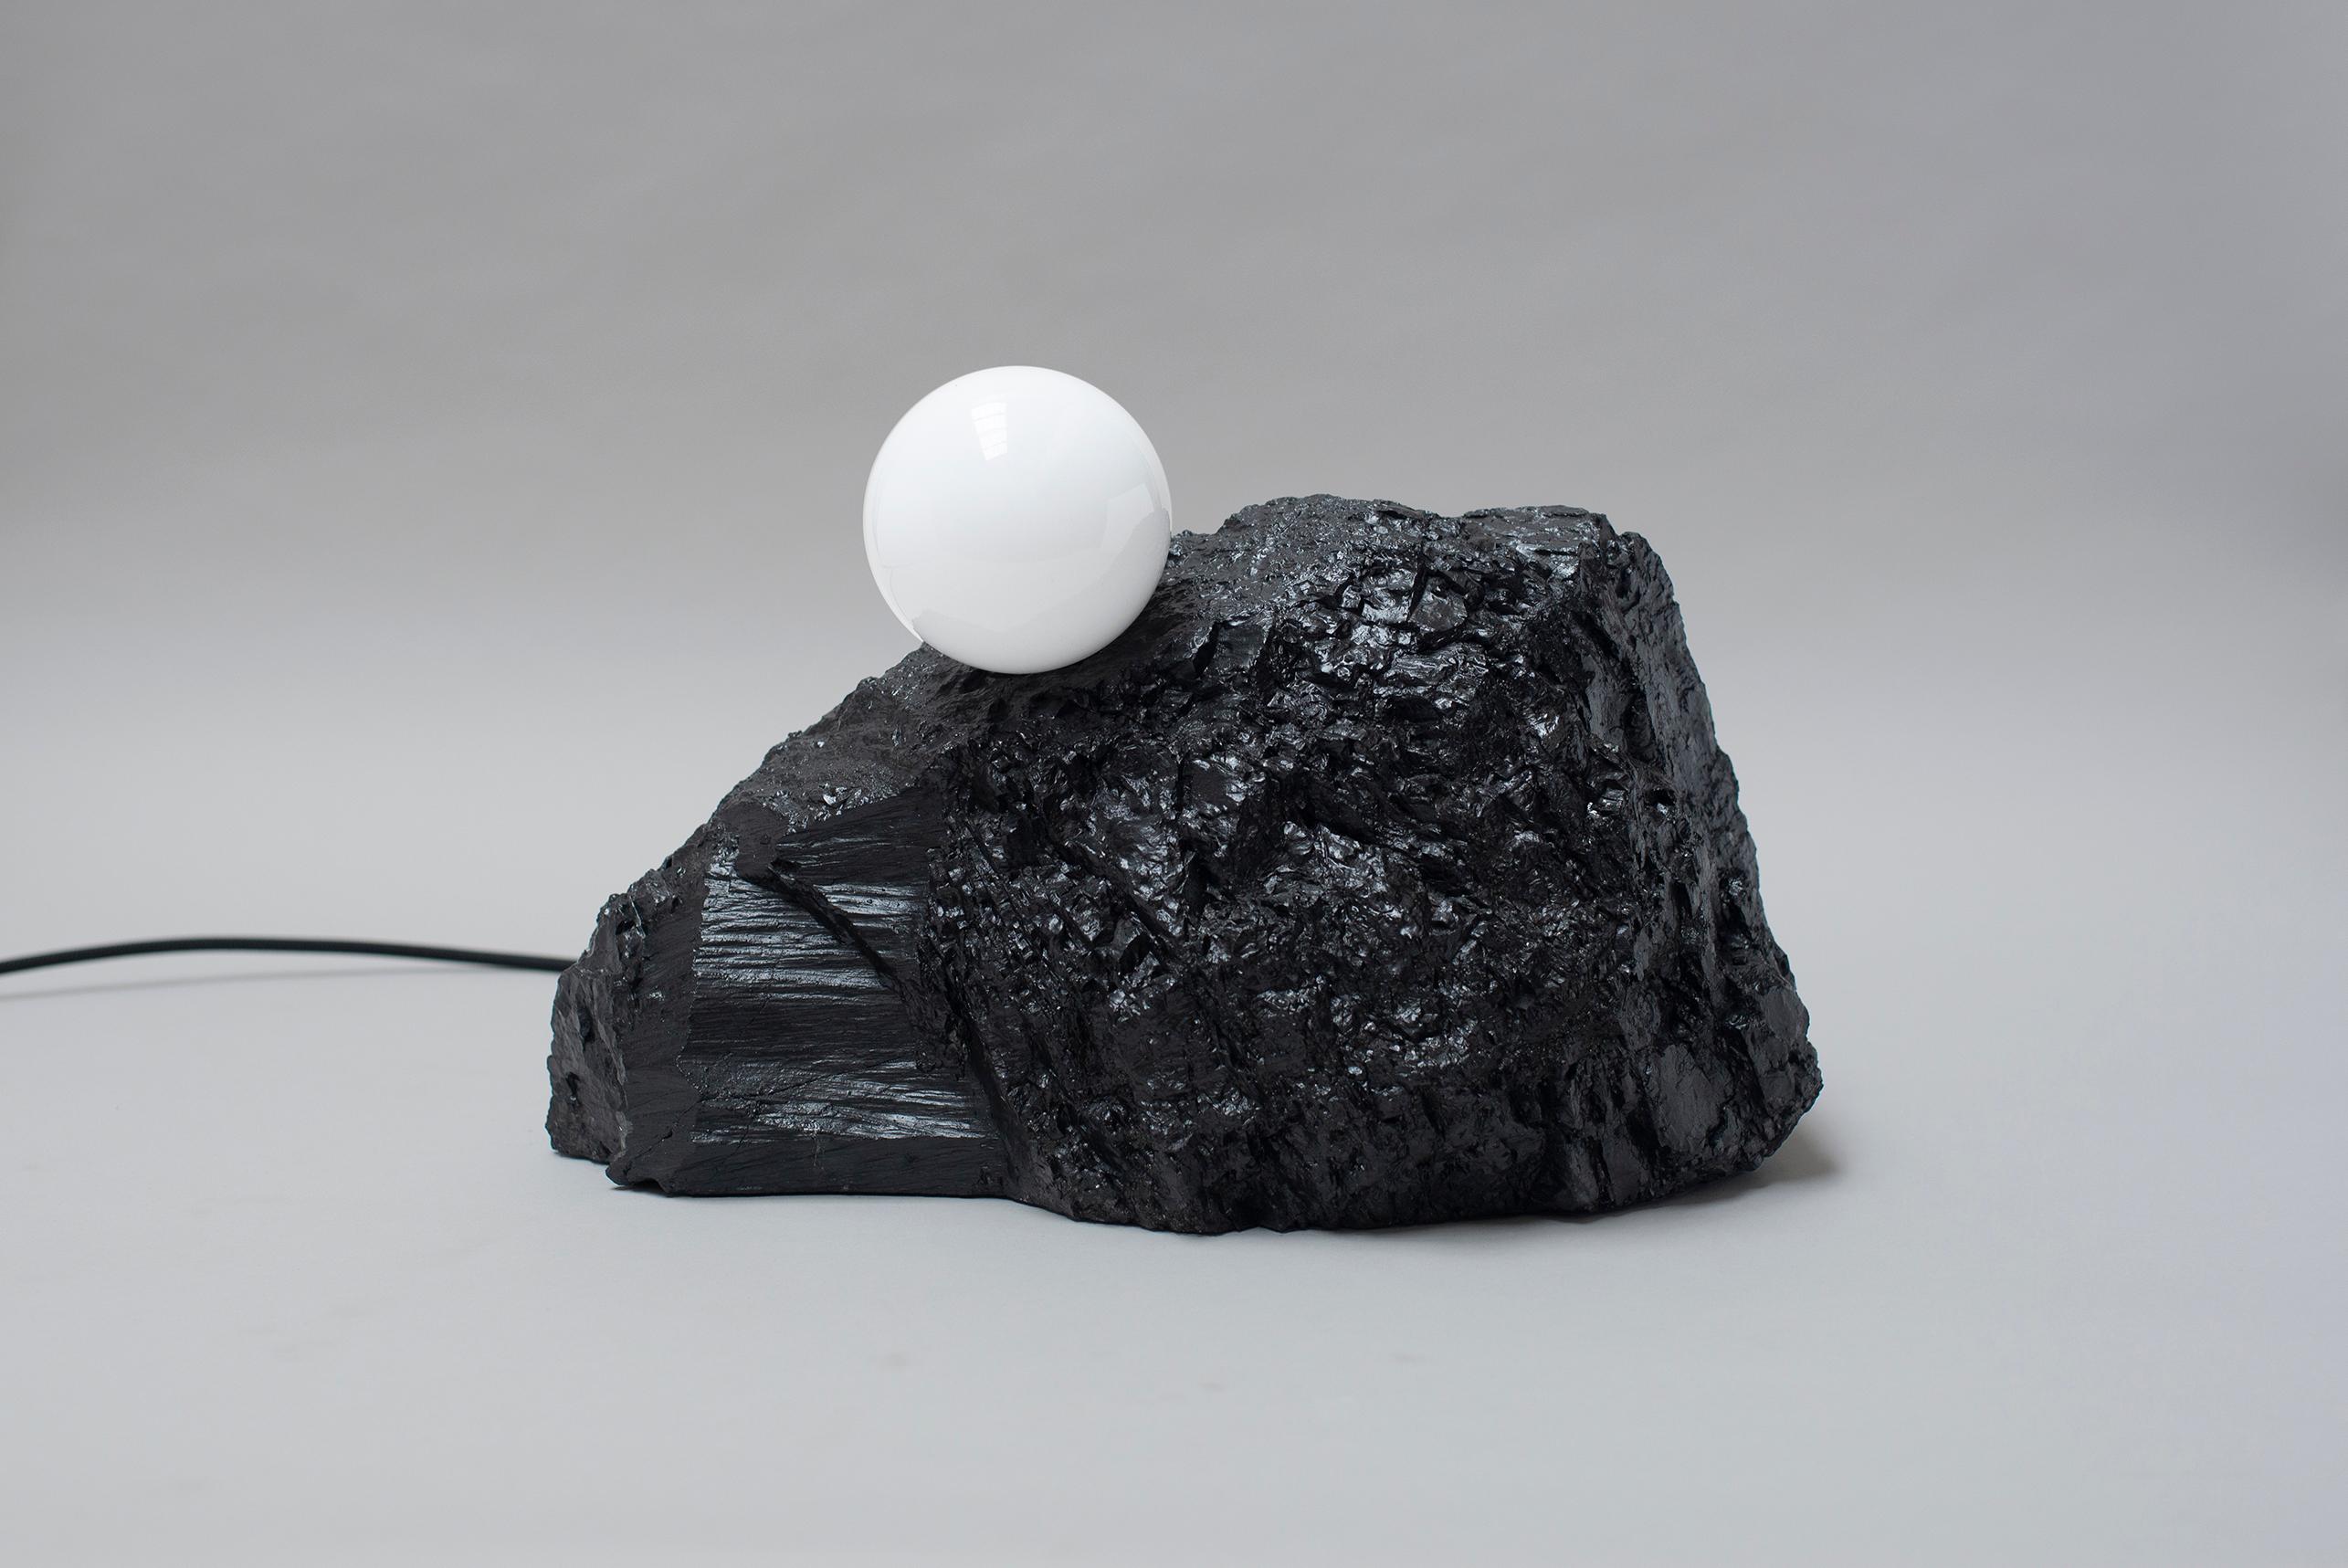 Table light 220 by Jesper Eriksson
Dimensions: D30 x H45 cm 
Materials: Anthracite coal, opal glass
Weight: 10 kg.

All our lamps can be wired according to each country. If sold to the USA it will be wired for the USA for instance.

Jesper